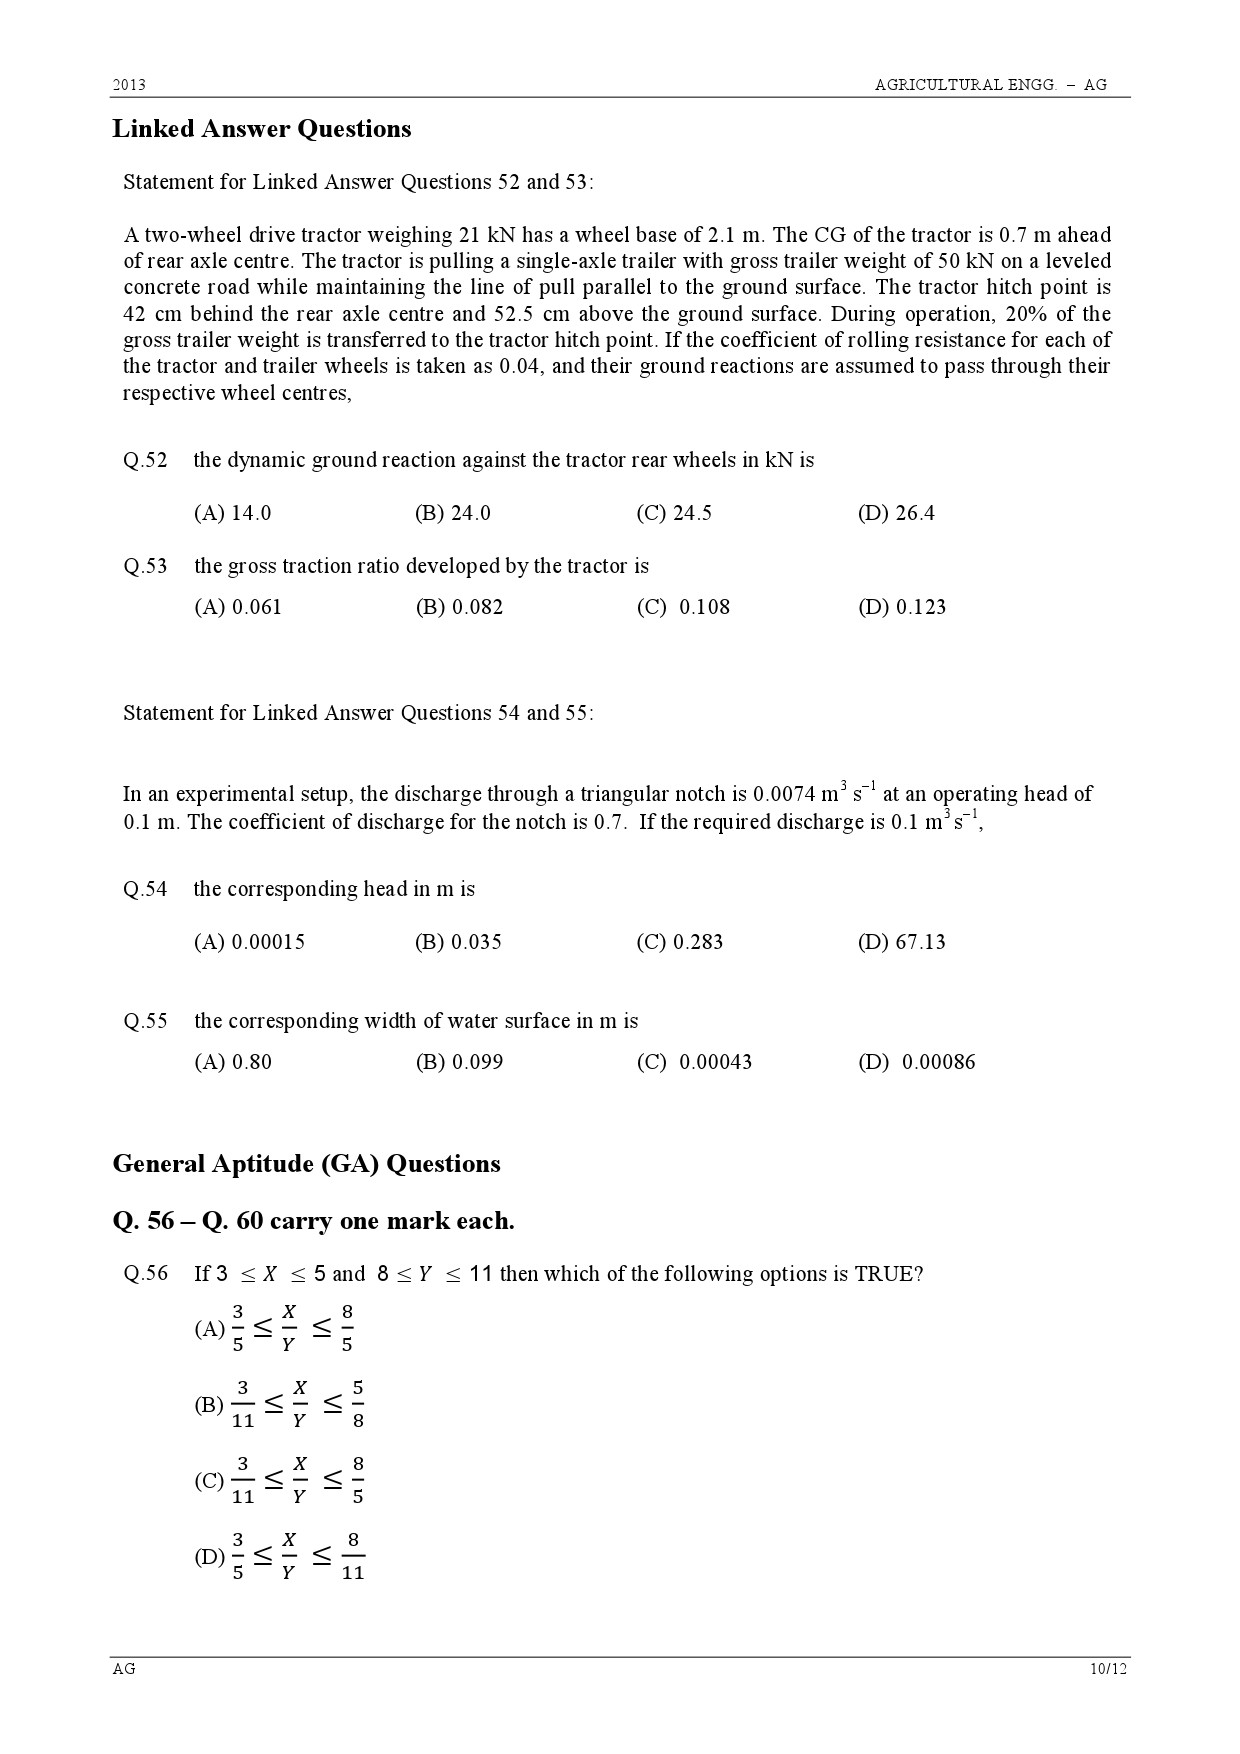 GATE Exam Question Paper 2013 Agricultural Engineering 10